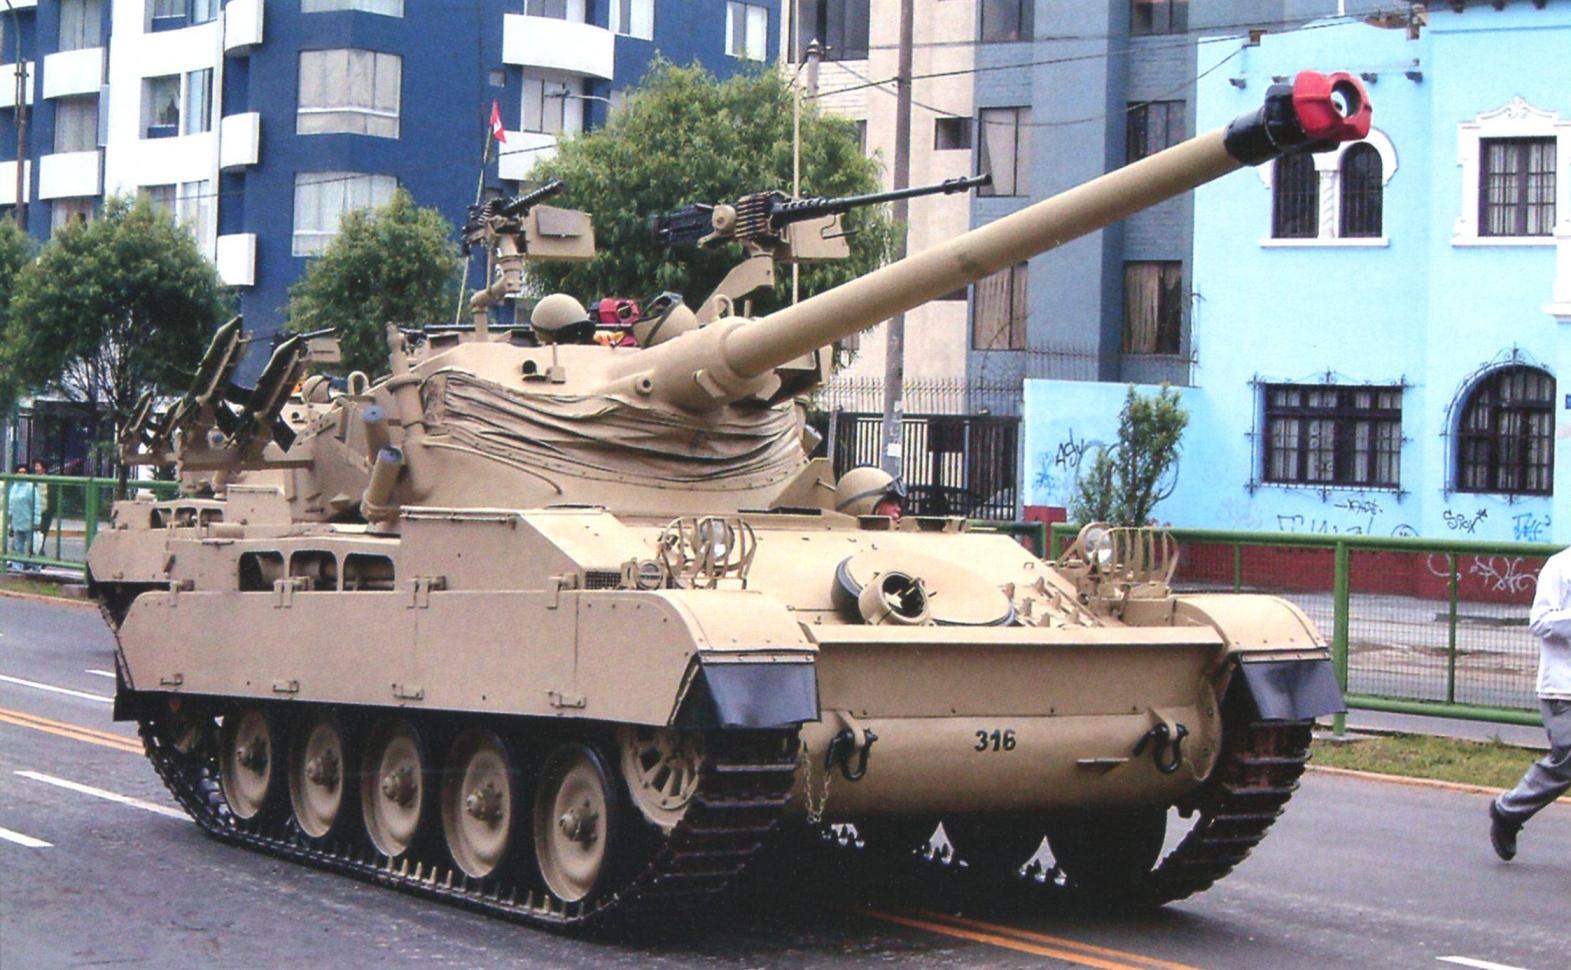 Light tank AMX-13 is armed with four missile launchers and two turret guns